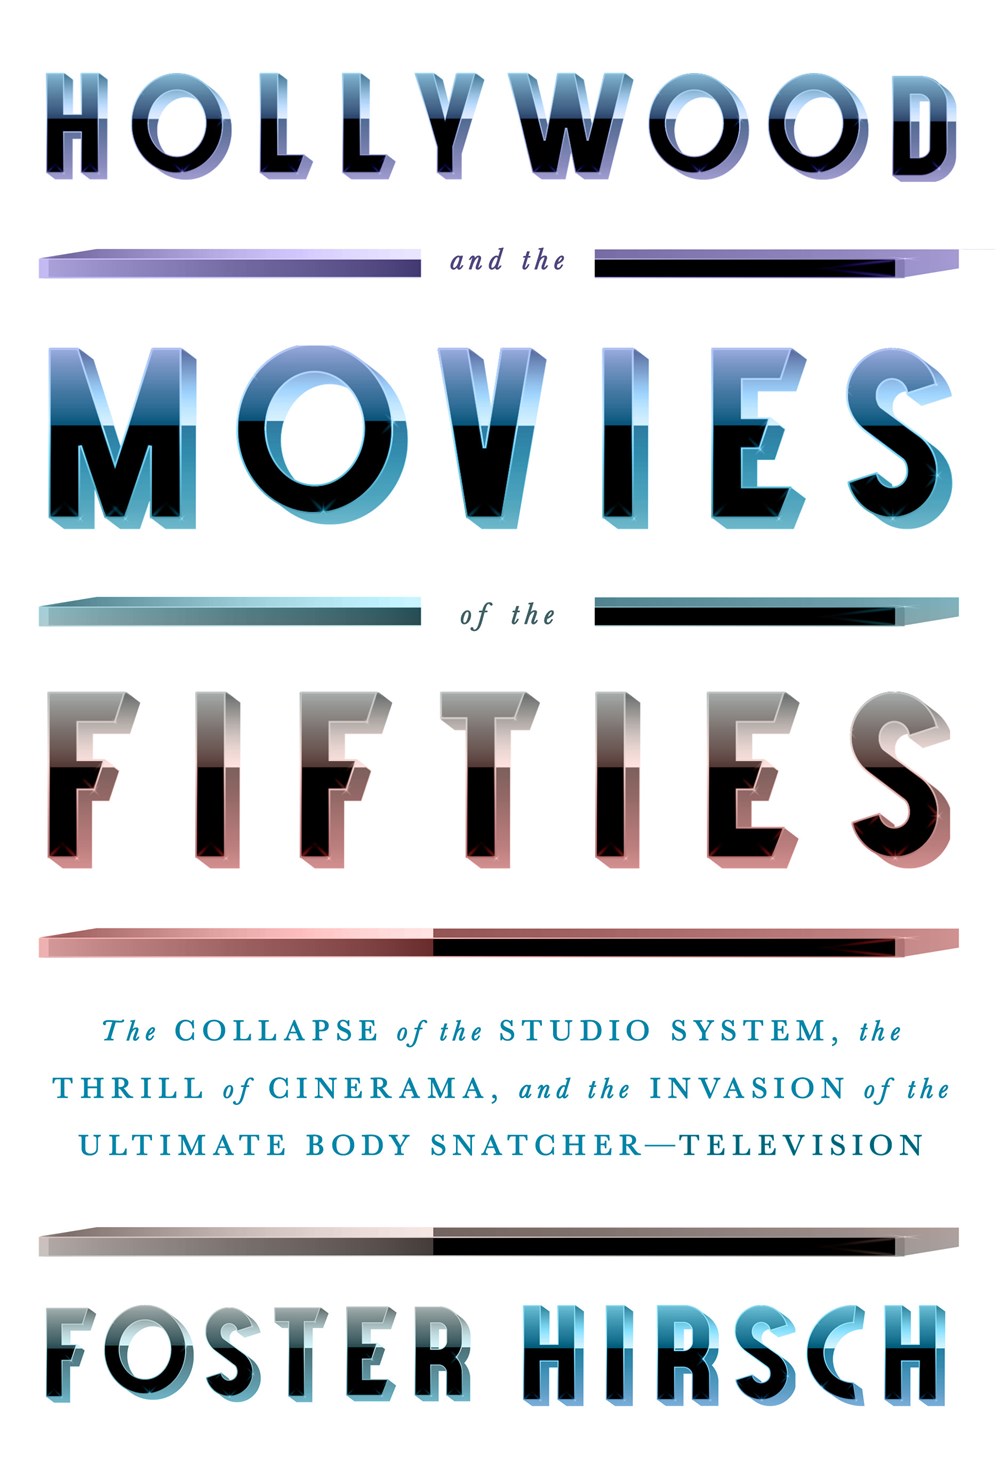 Hollywood and the Movies of the Fifties: The Collapse of the Studio System, the Thrill of Cinerama, and the Invasion of the Ultimate Body Snatcher—Television